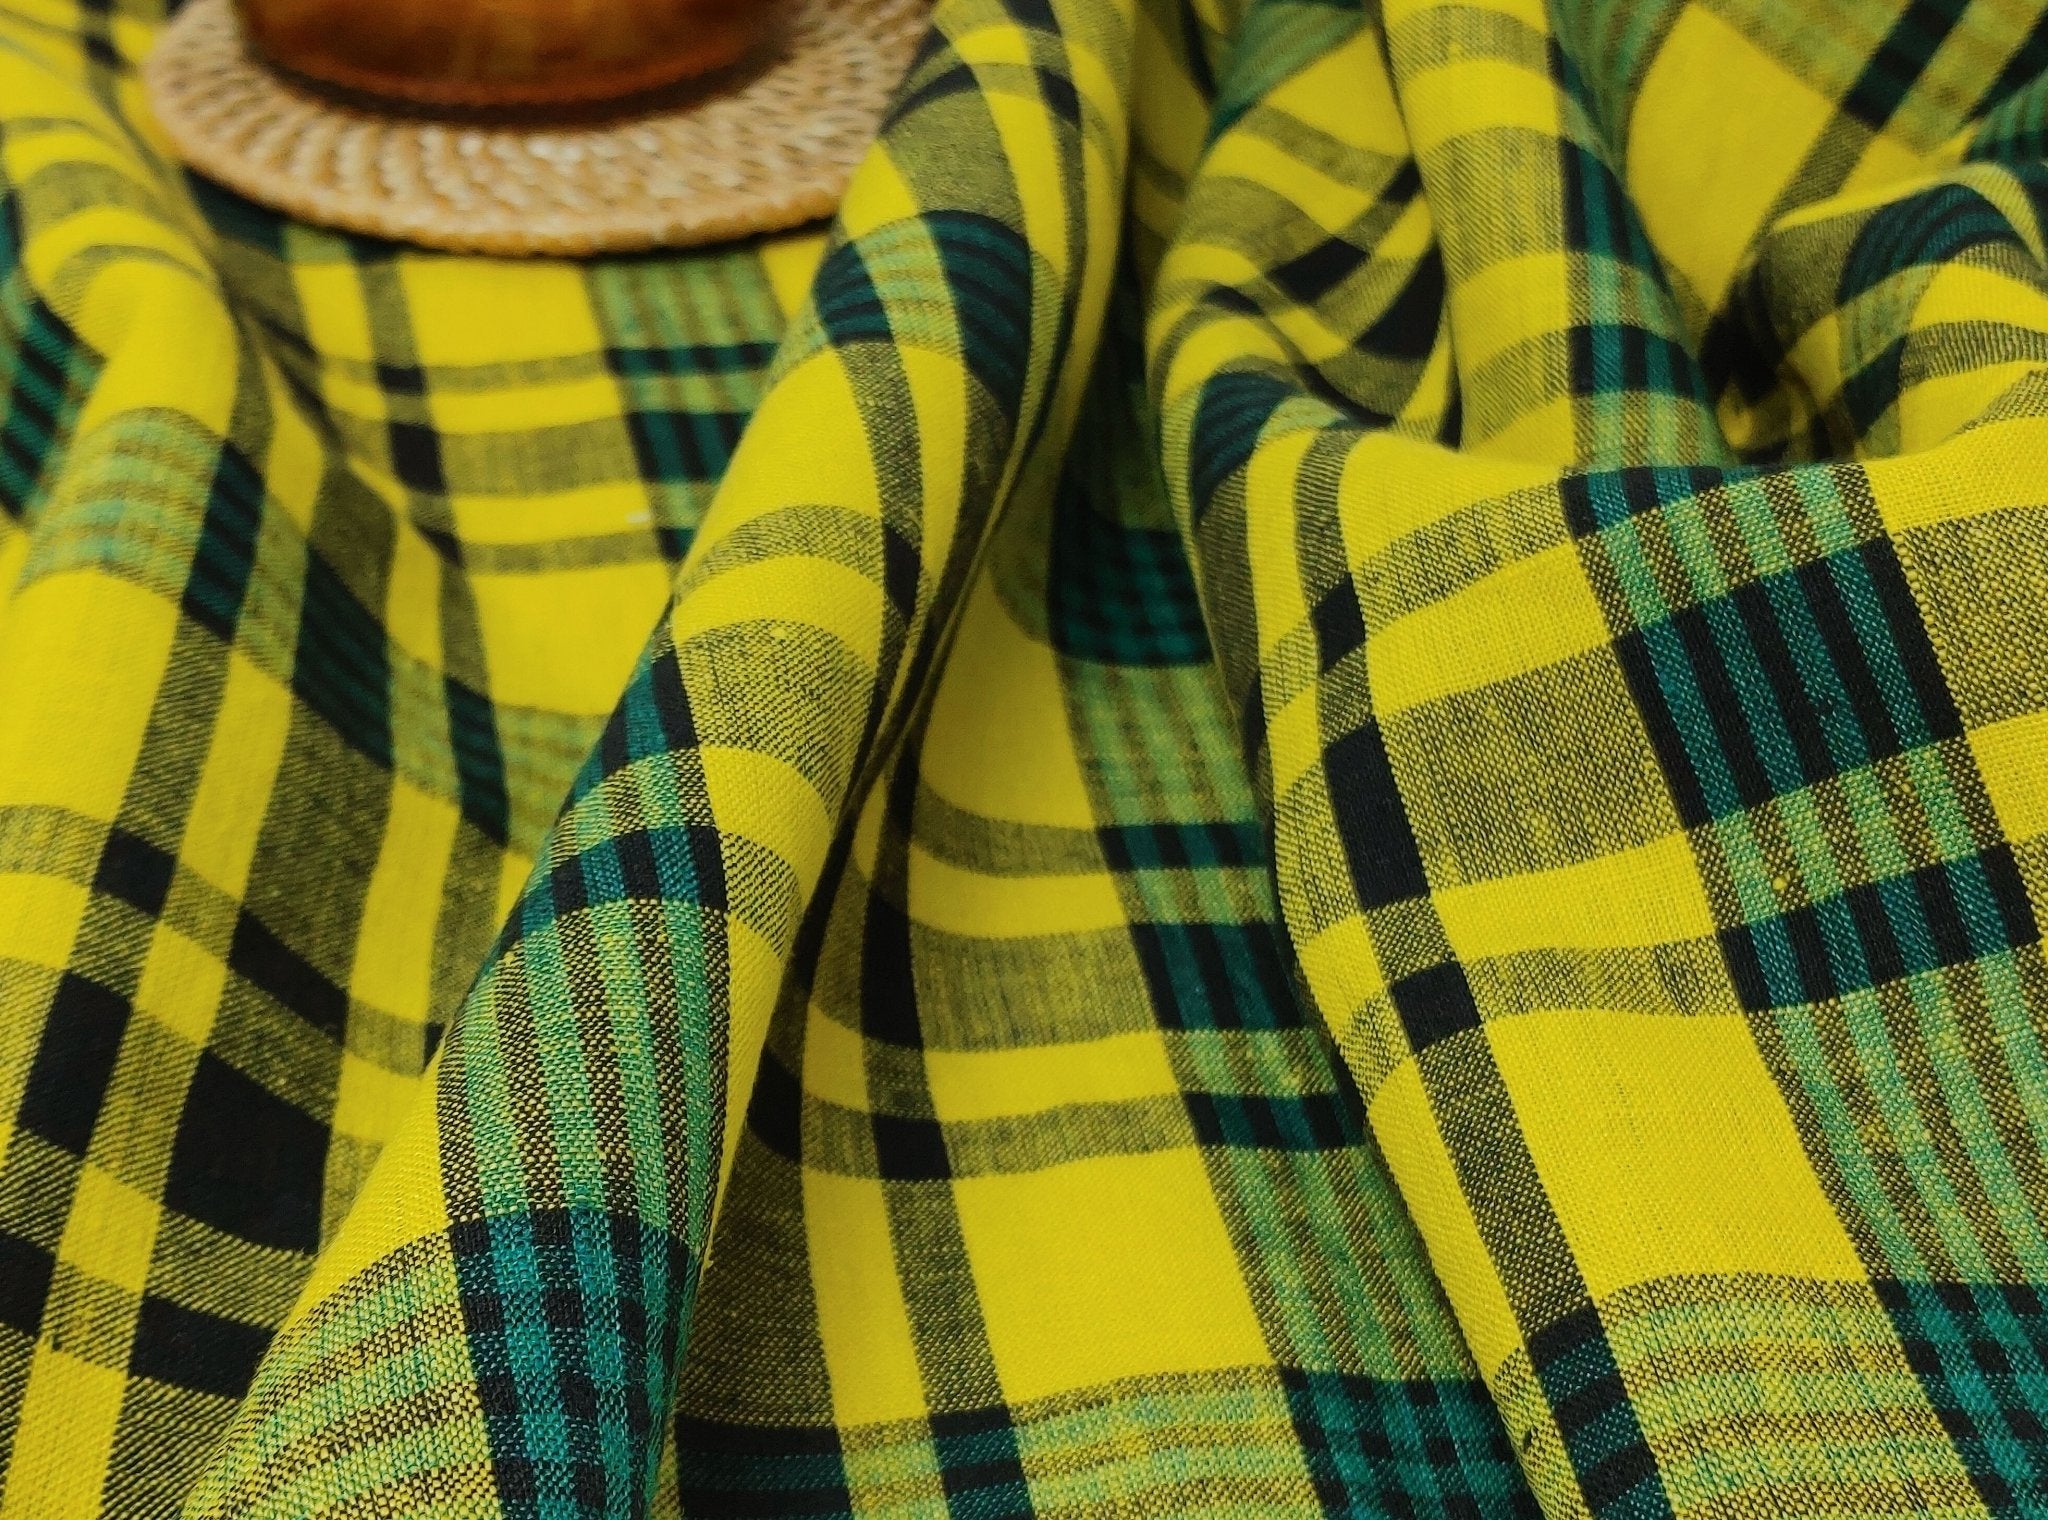 Sunny Fields: Yellow, Black and Green Linen Cotton Plaid Fabric 6619 - The Linen Lab - Yellow